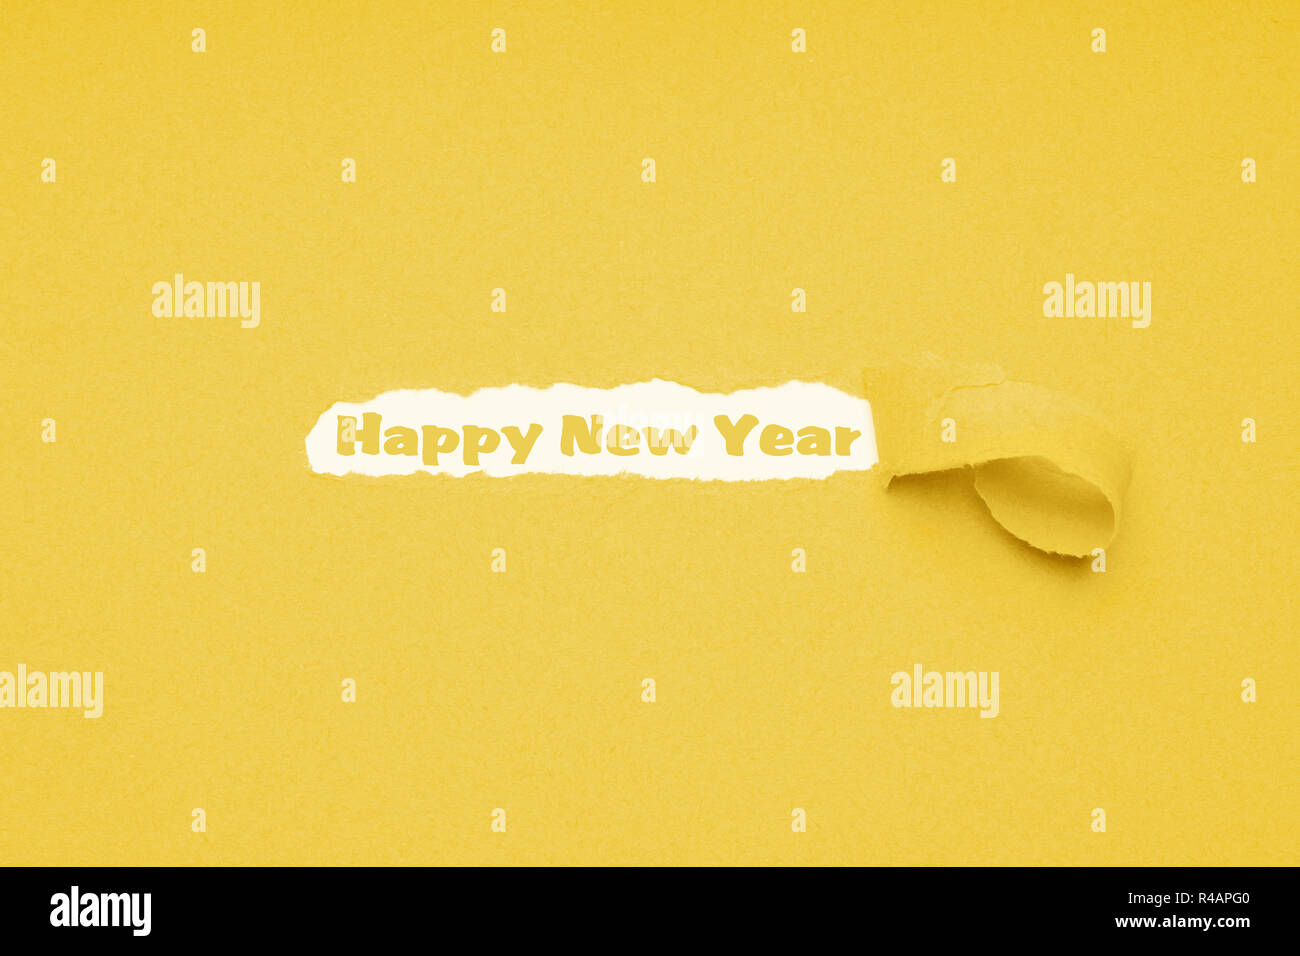 happy new year text on yellow paper background Stock Photo